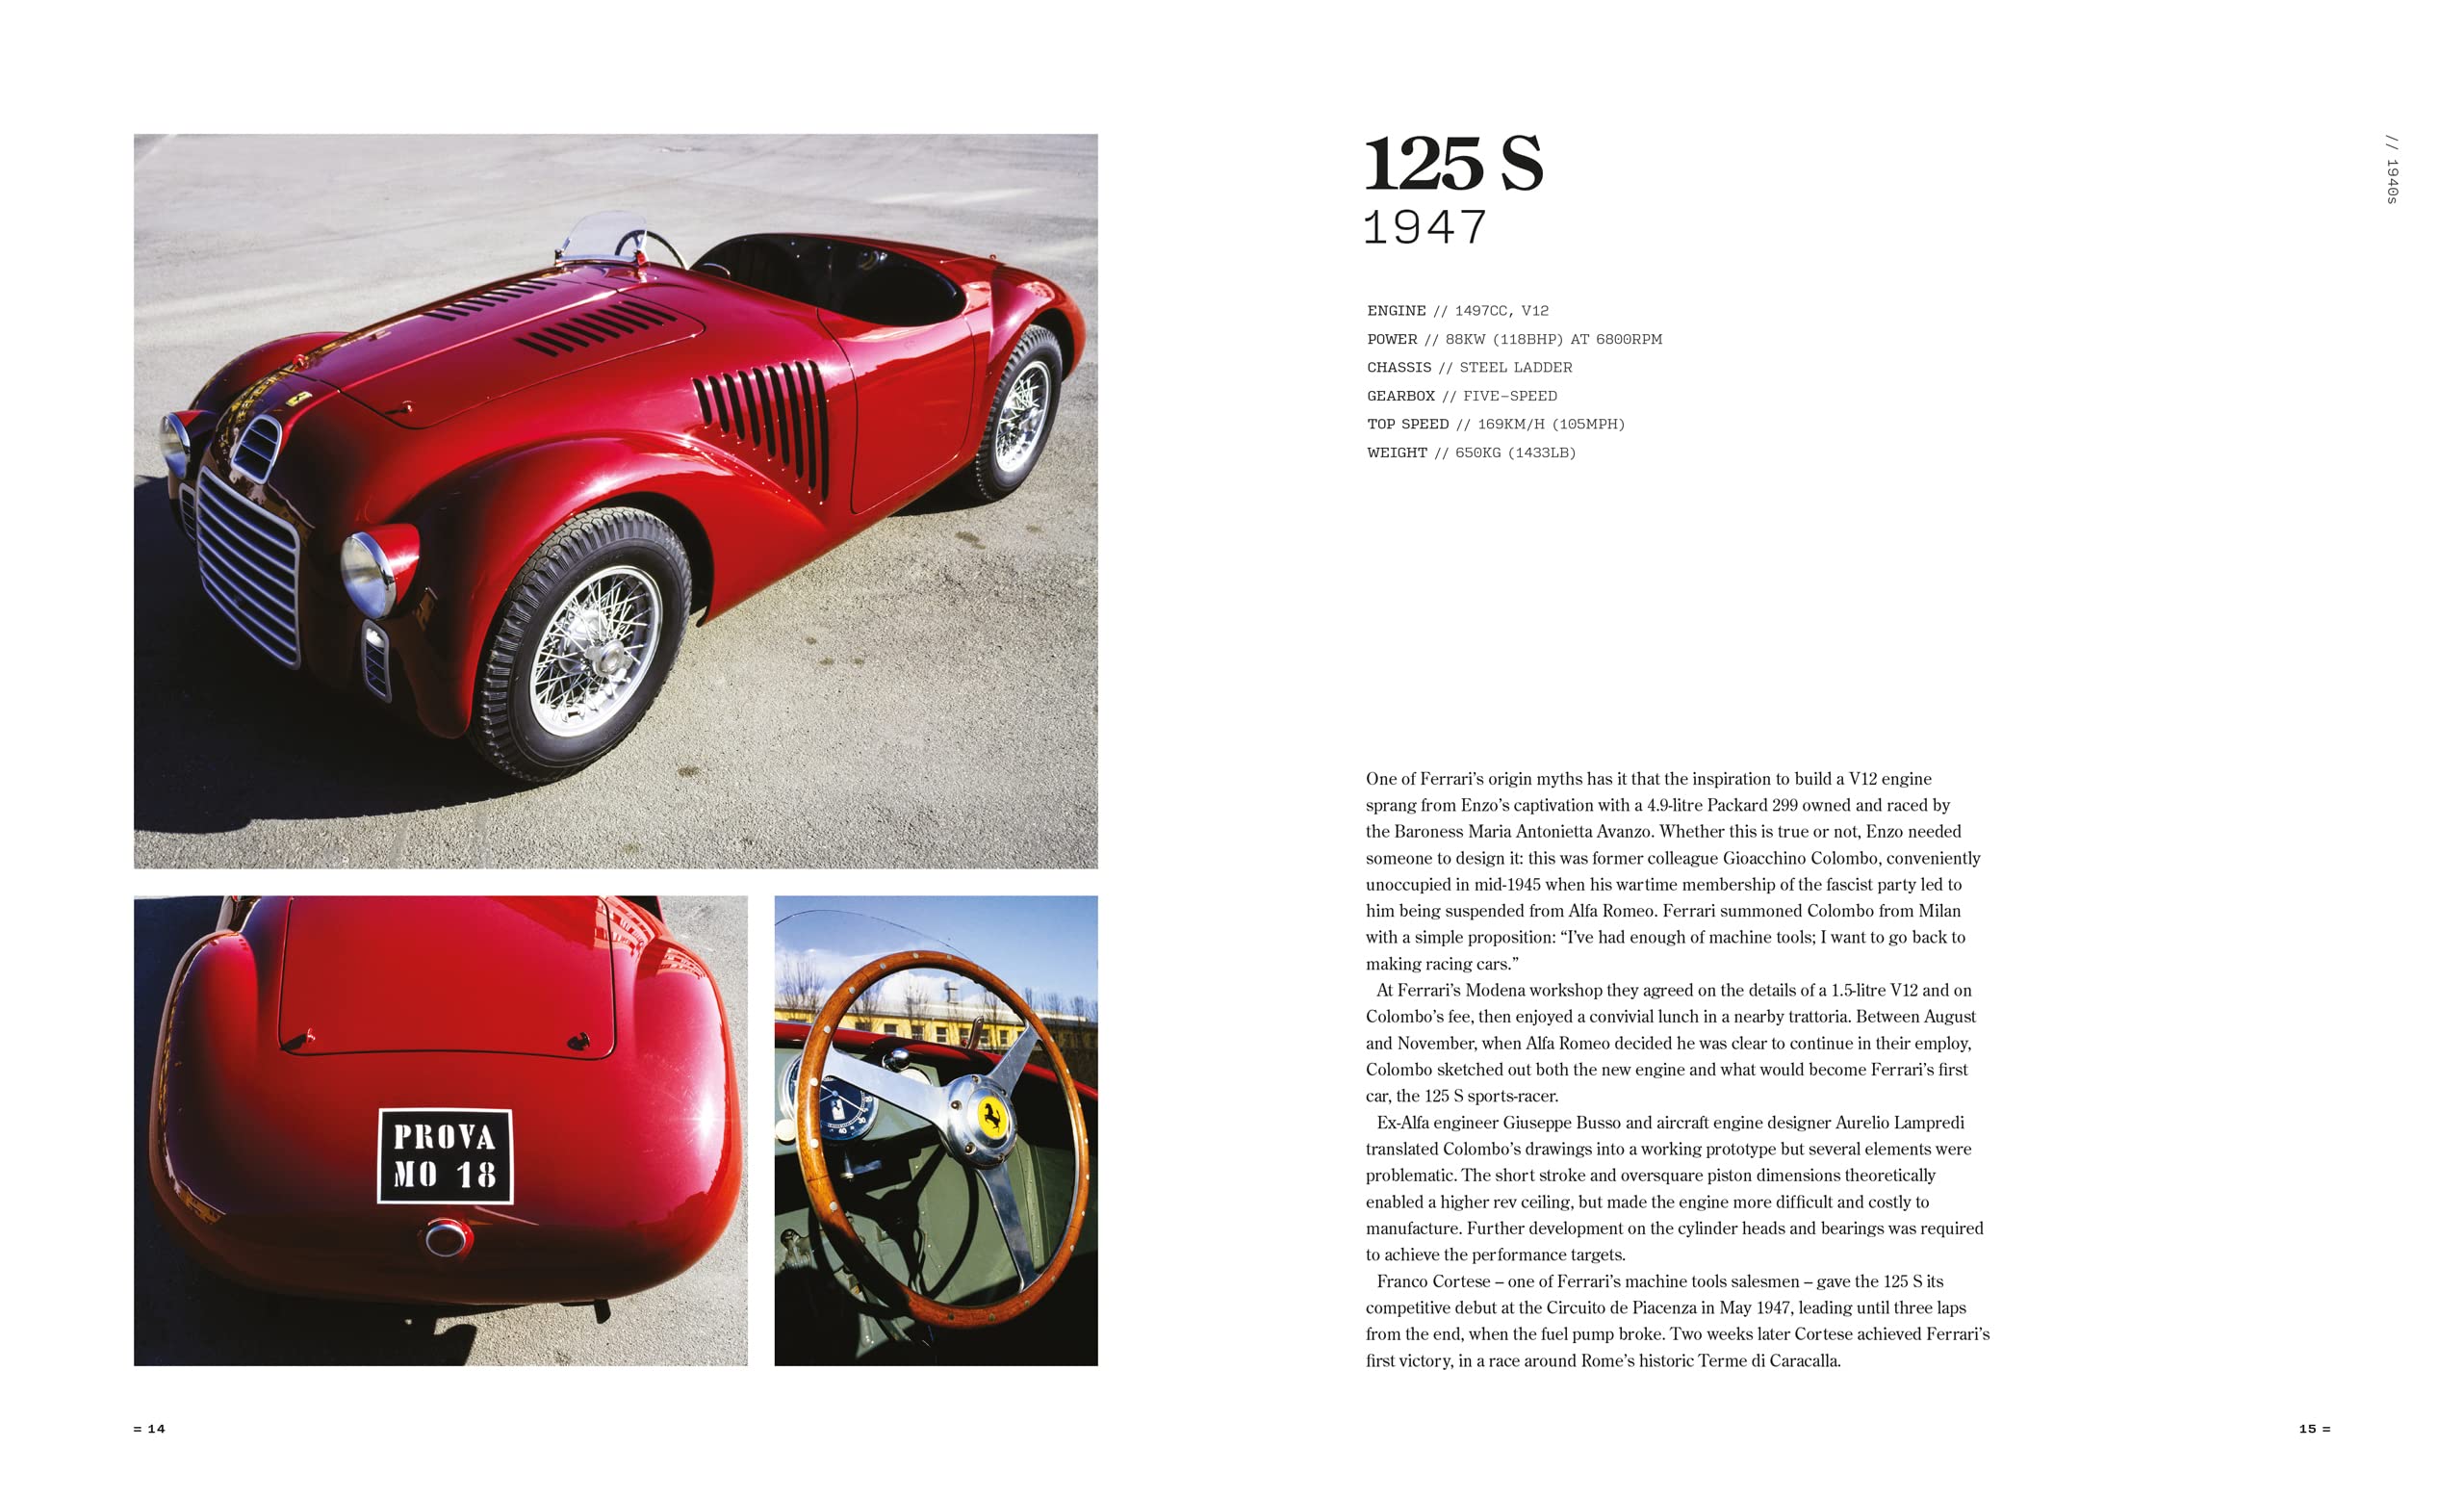 Dream in Red - Ferrari by Maggi & Maggi: A photographic journey through the finest cars ever made